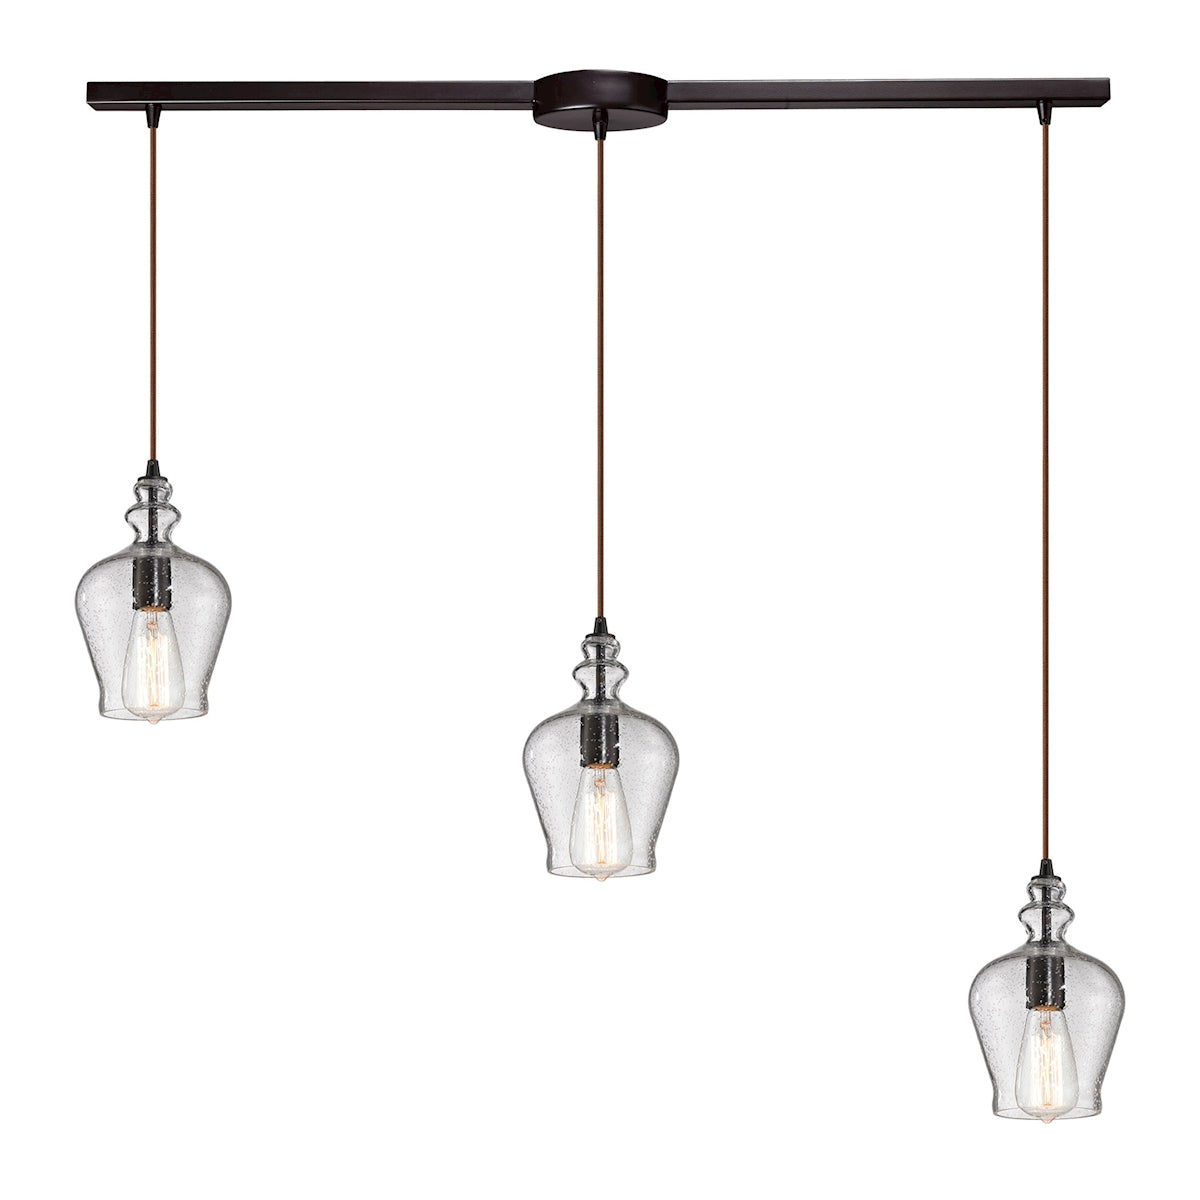 ELK Lighting 60066-3L Menlow Park 3-Light Linear Mini Pendant Fixture in Oil Rubbed Bronze with Smoked Glass